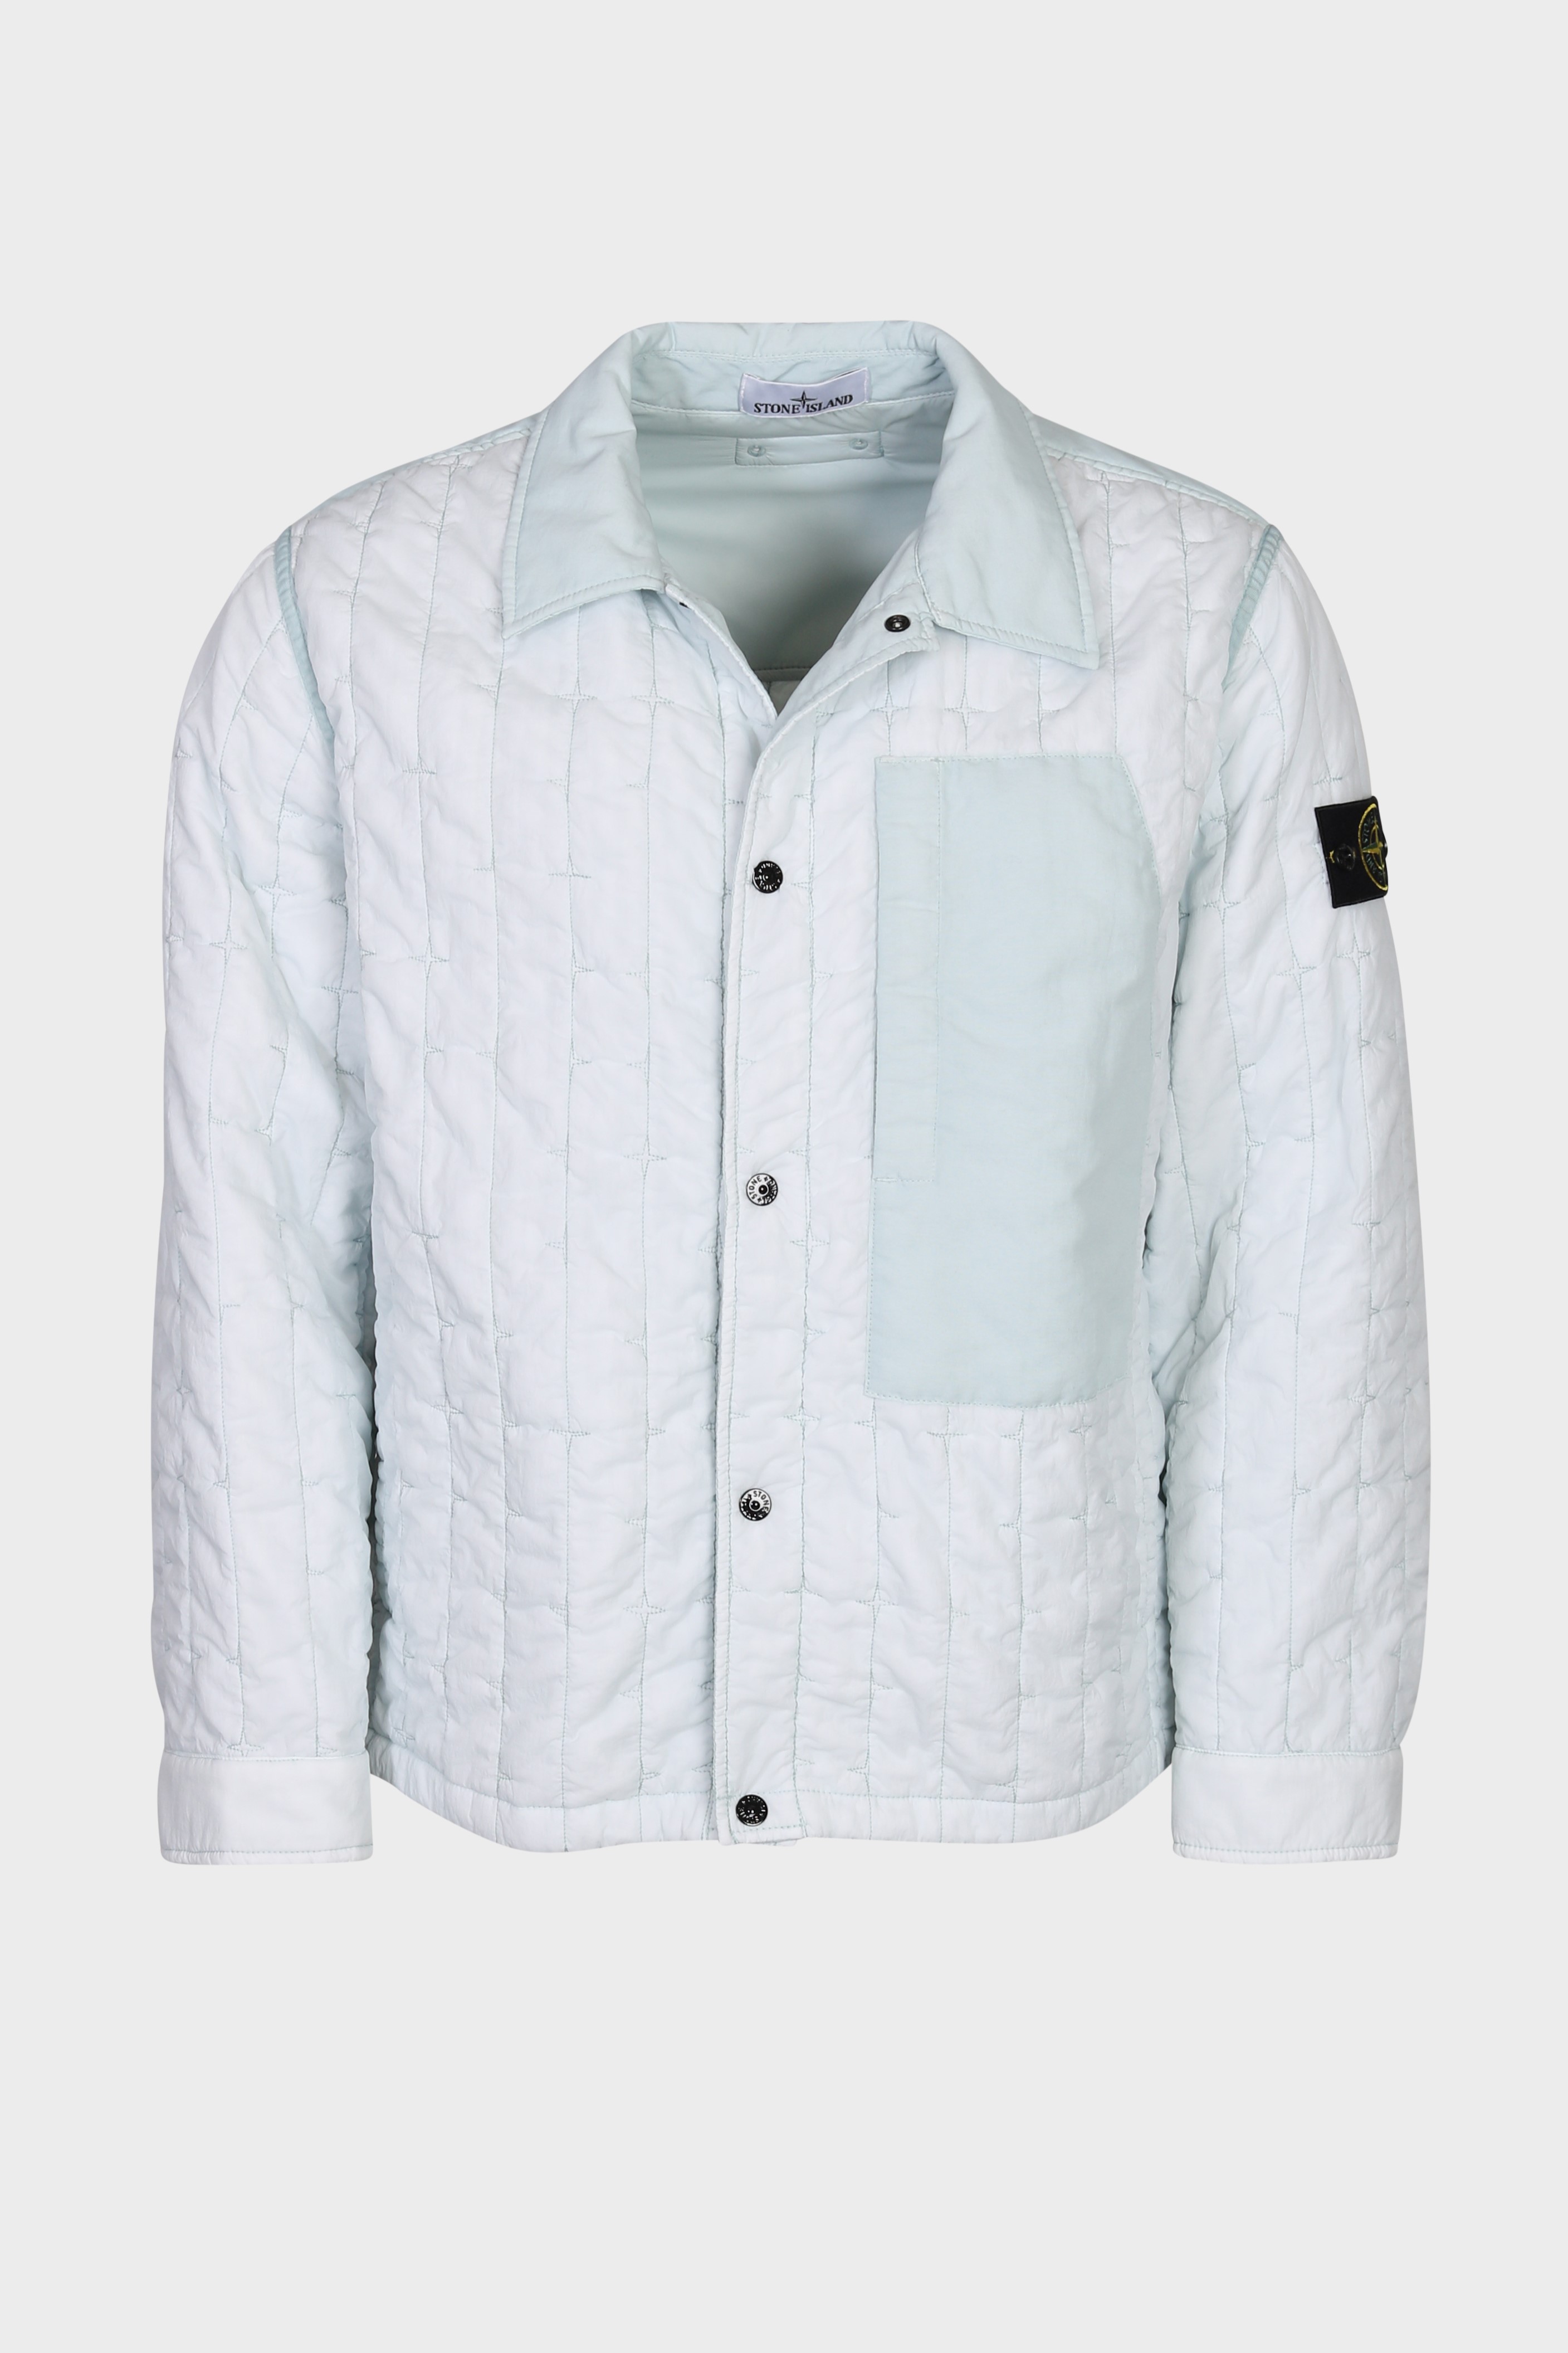 STONE ISLAND Quilted Nylon Stella Jacket in Sky Blue XL